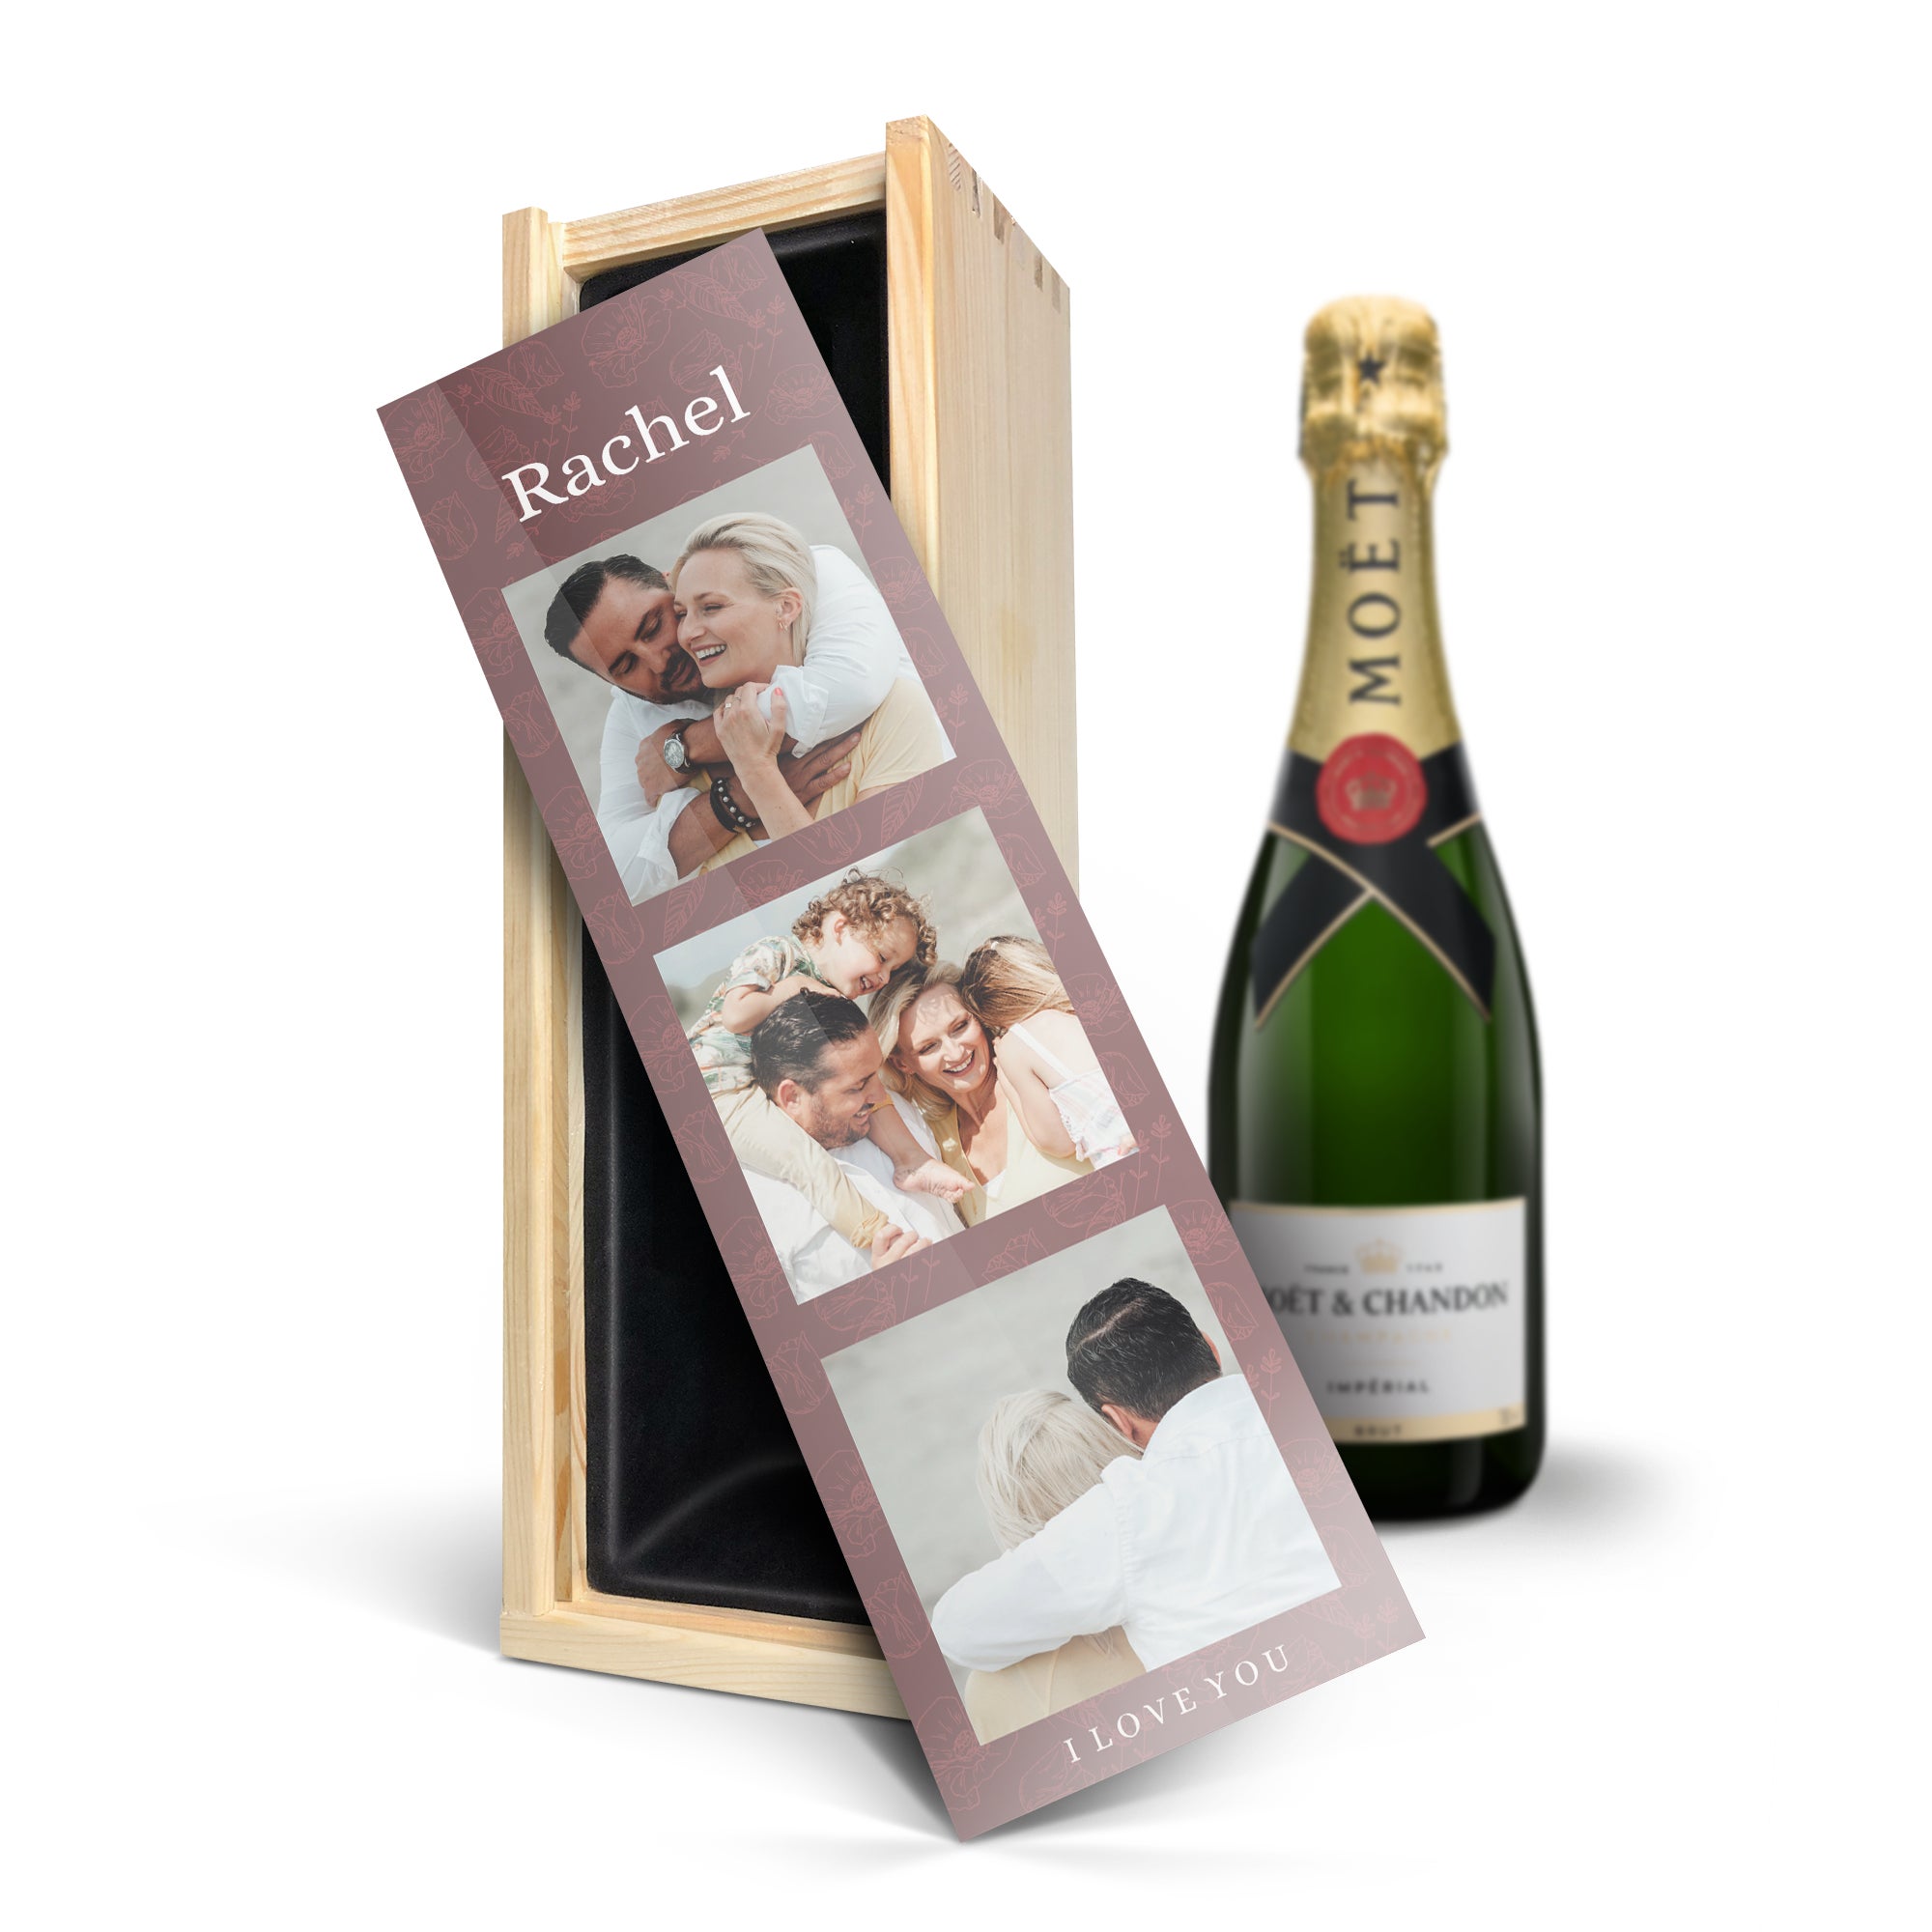 Champagne in personalised wooden case - Moet et Chandon (750ml)